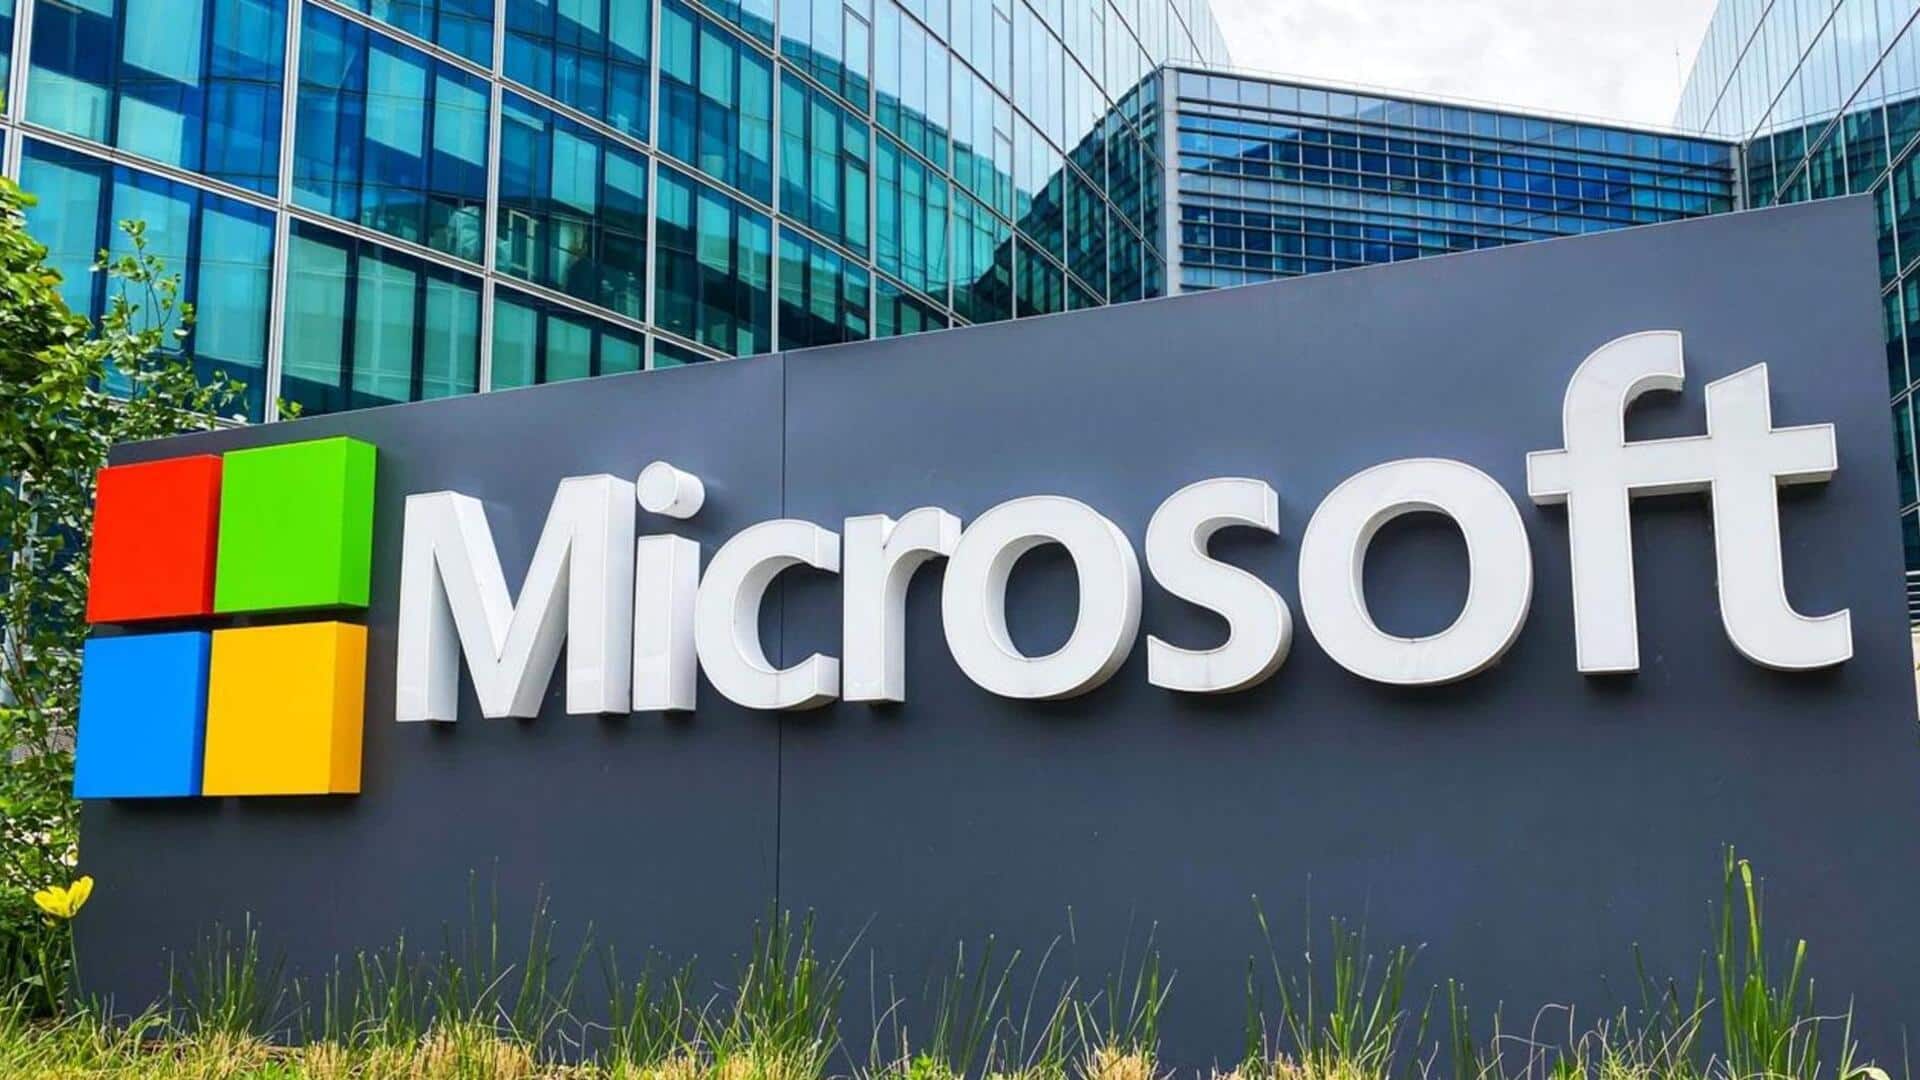 Microsoft criticized for irresponsible and negligent cybersecurity practices